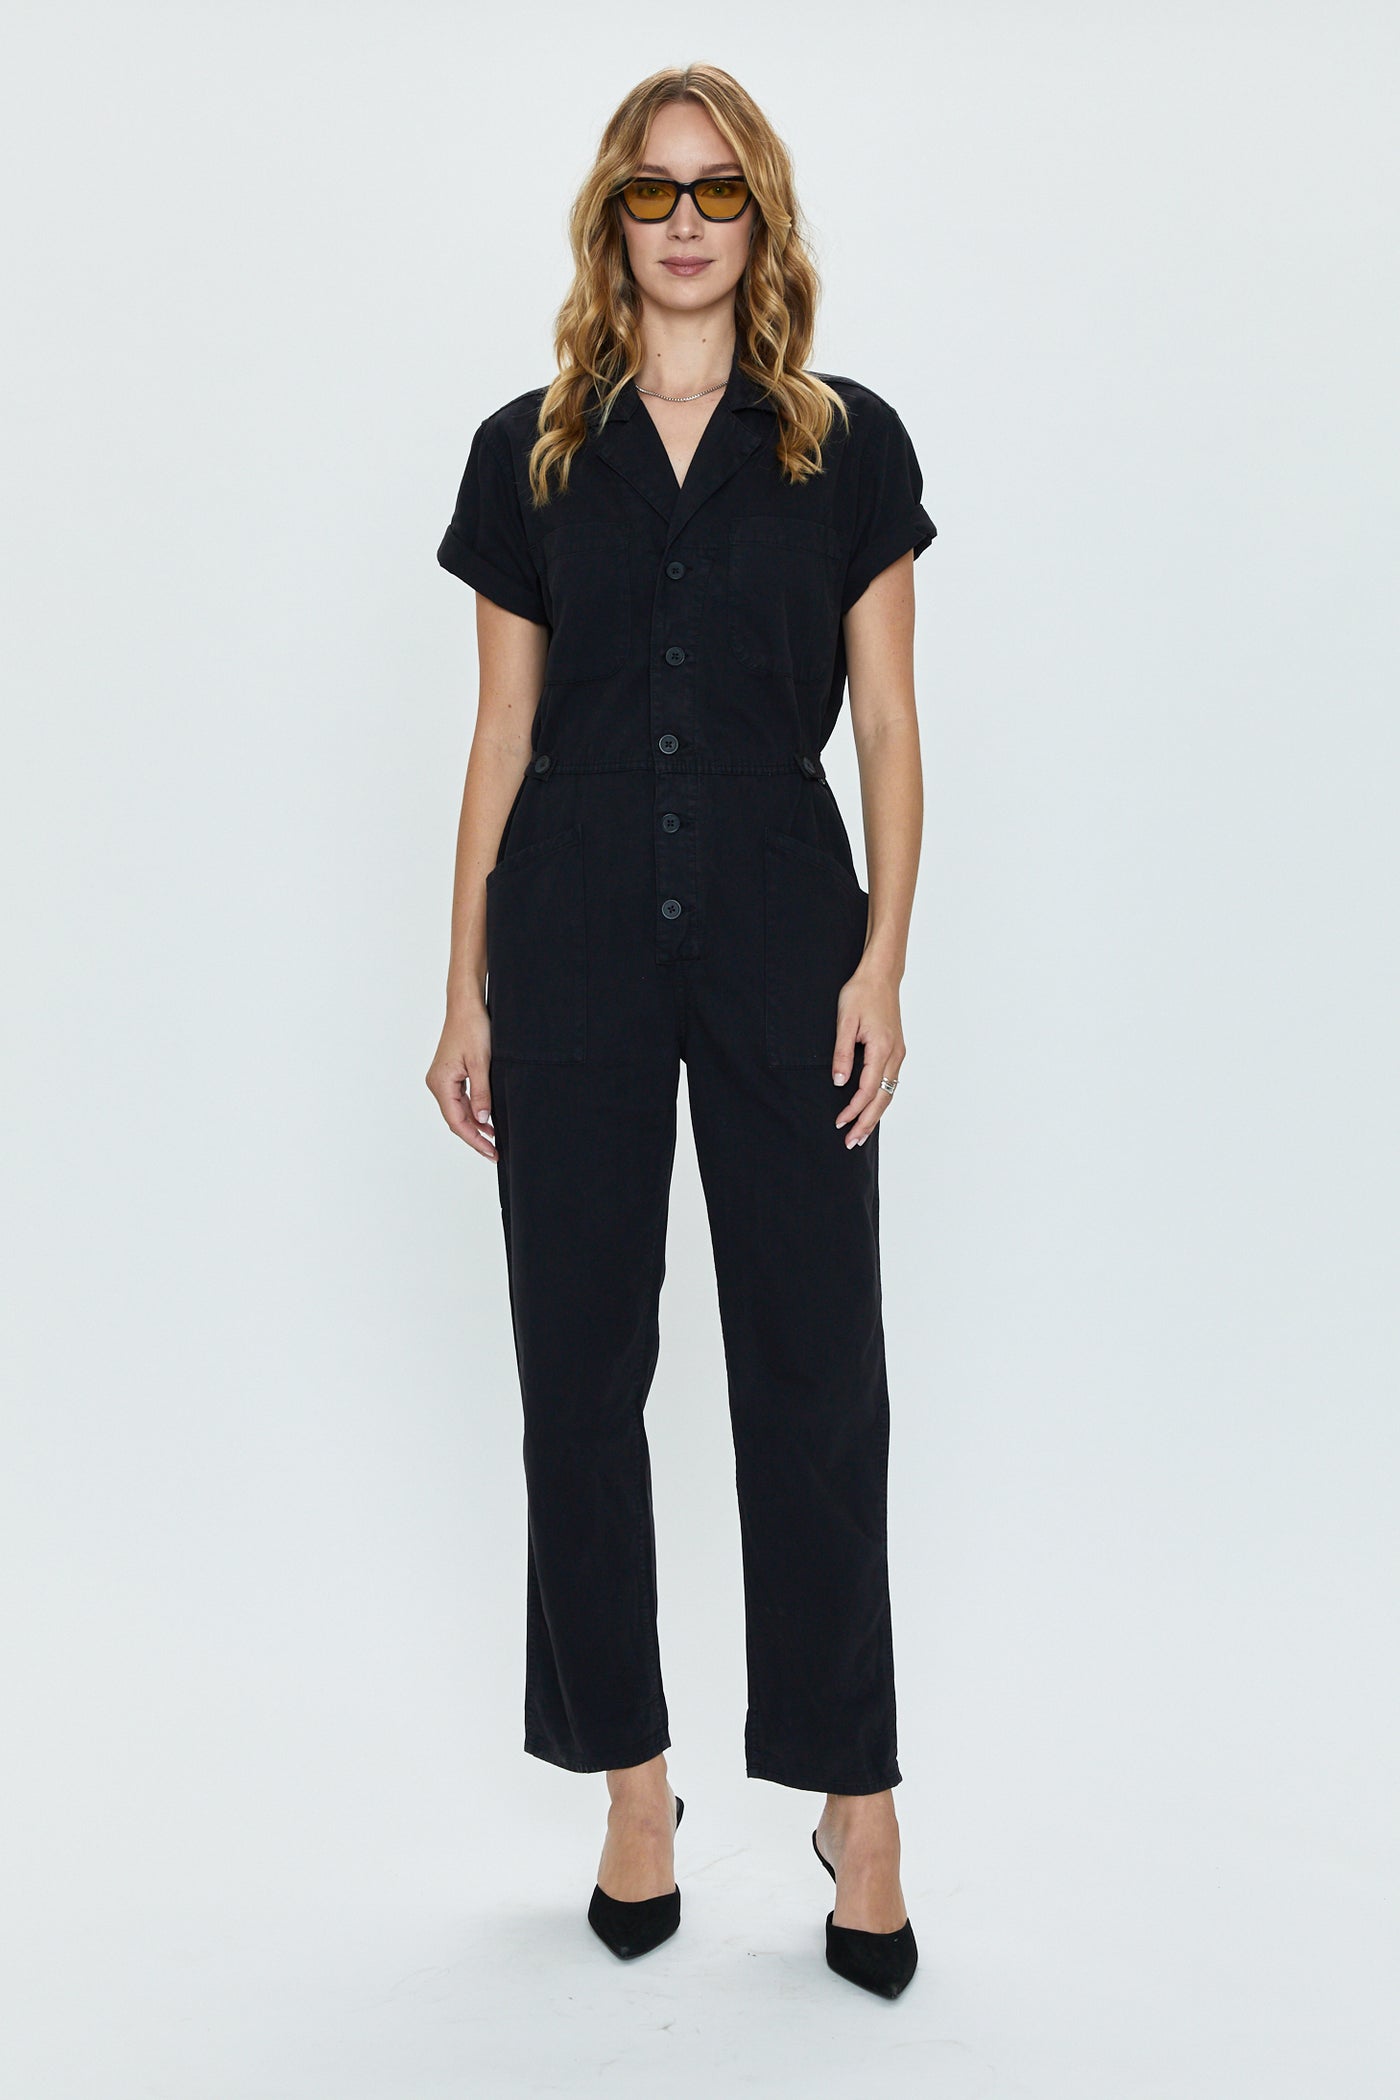 Grover Short Sleeve Jumpsuit in Fade to Black by Pistola